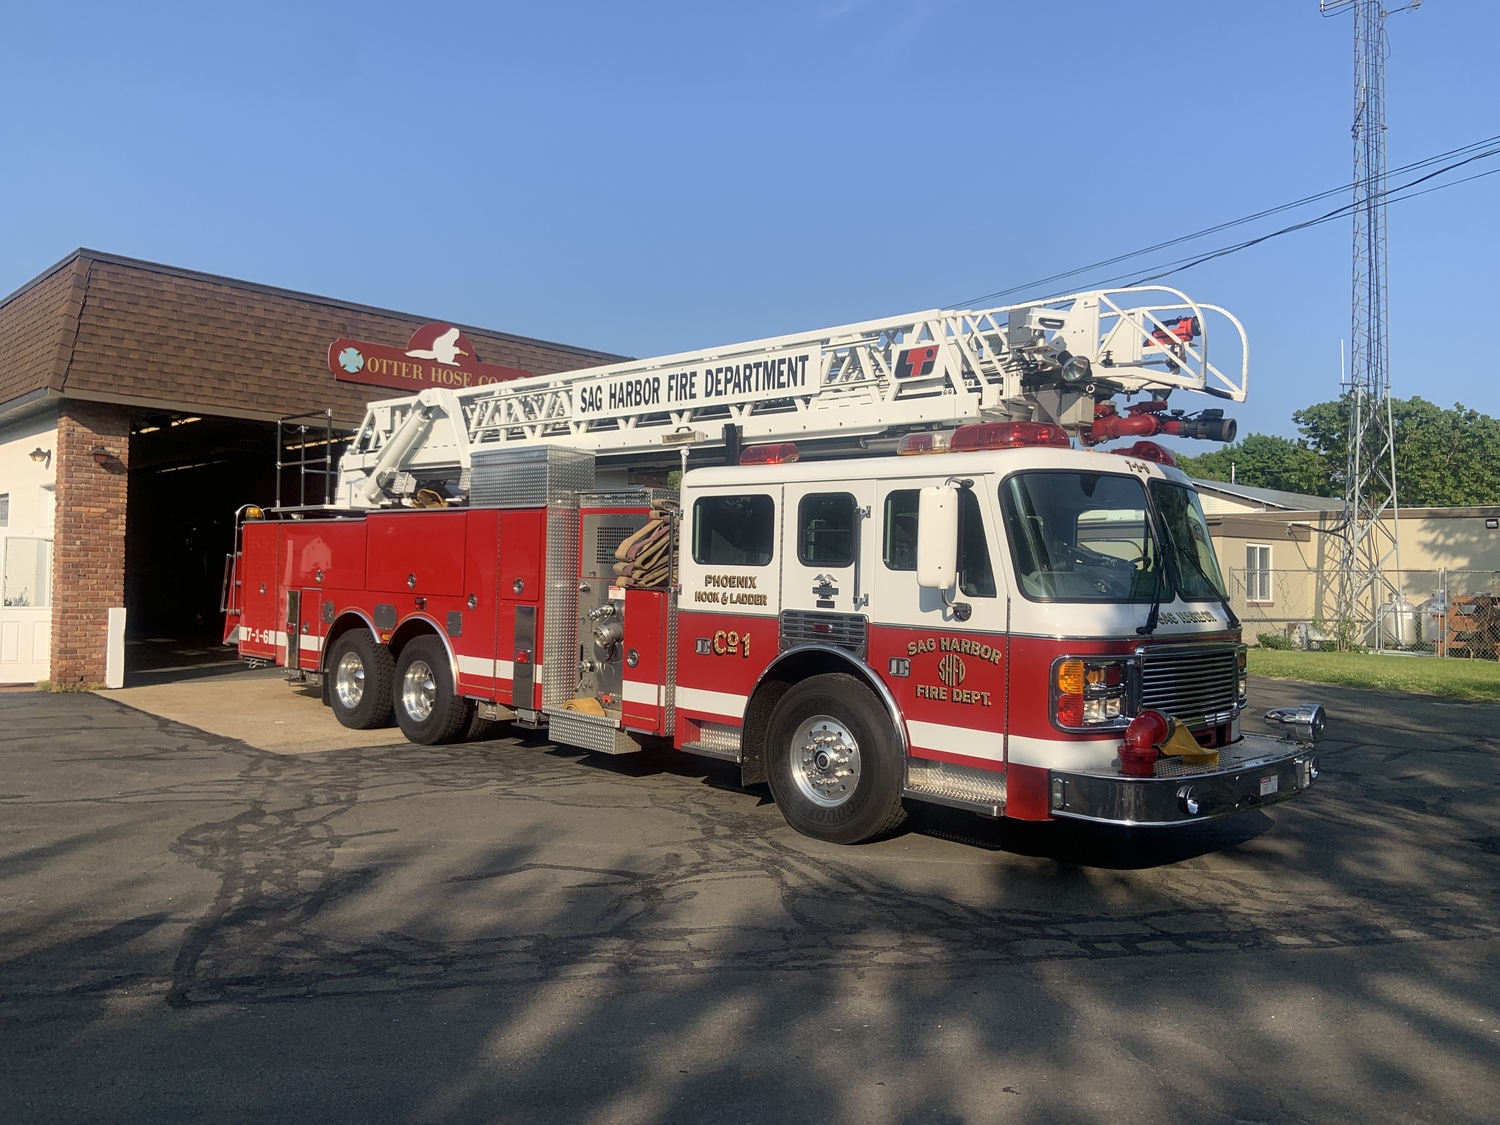 The Sag Harbor Fire Department is planning to order a replacement for this 199 American LaFrance ladder truck. STEPHEN J. KOTZ